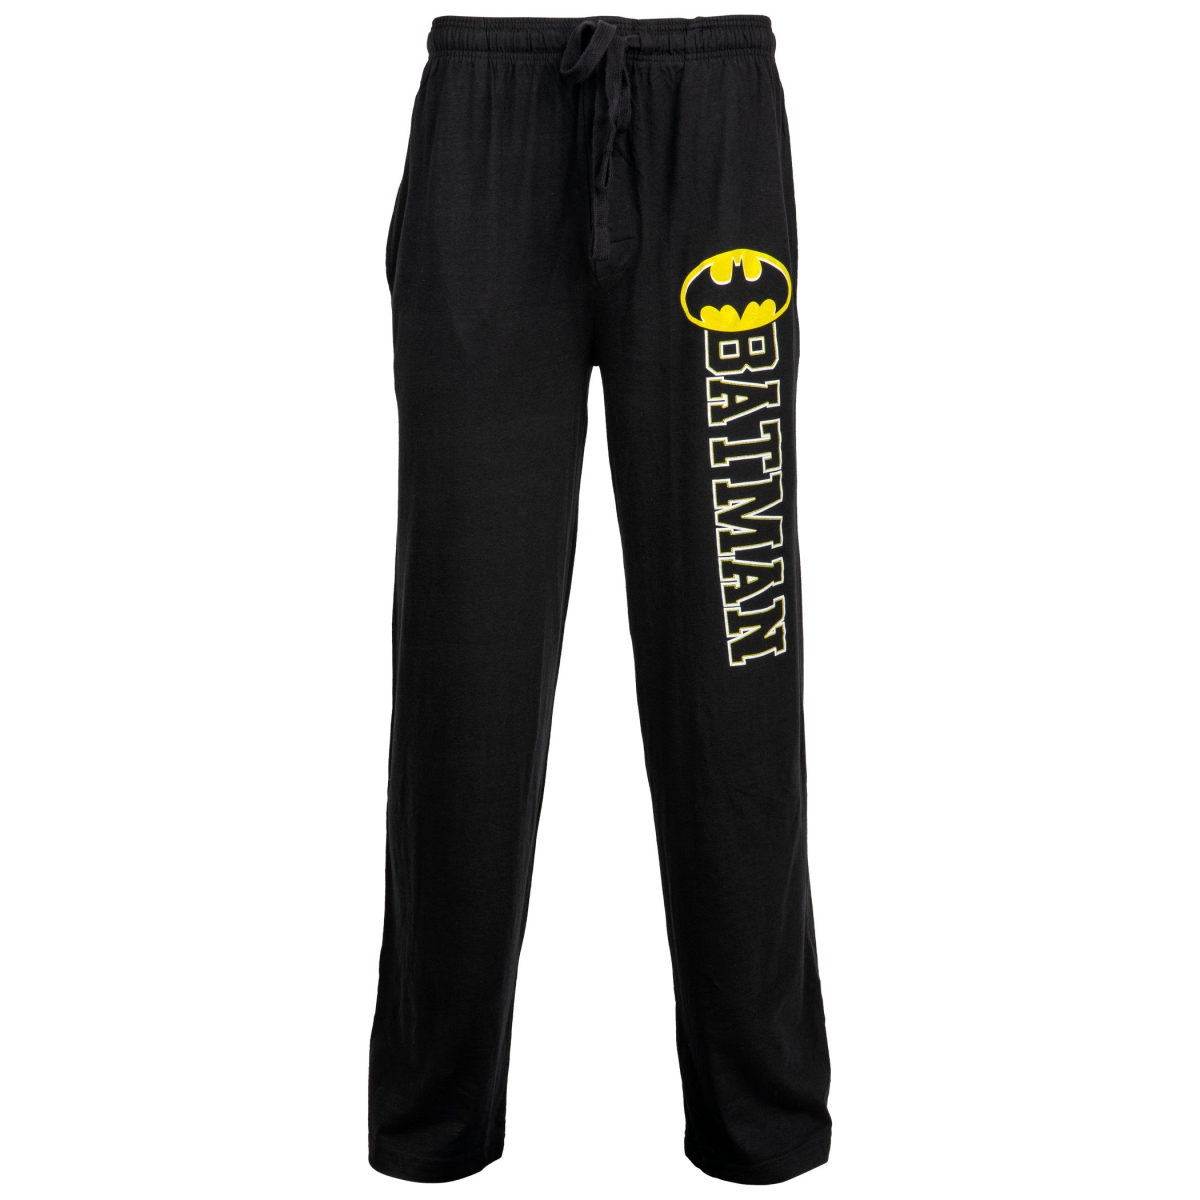 Picture of Batman 810746-small-28-30- Bold Symbol Over Text Outline Unisex Sleep Pants, Black - Small - Size 28-30